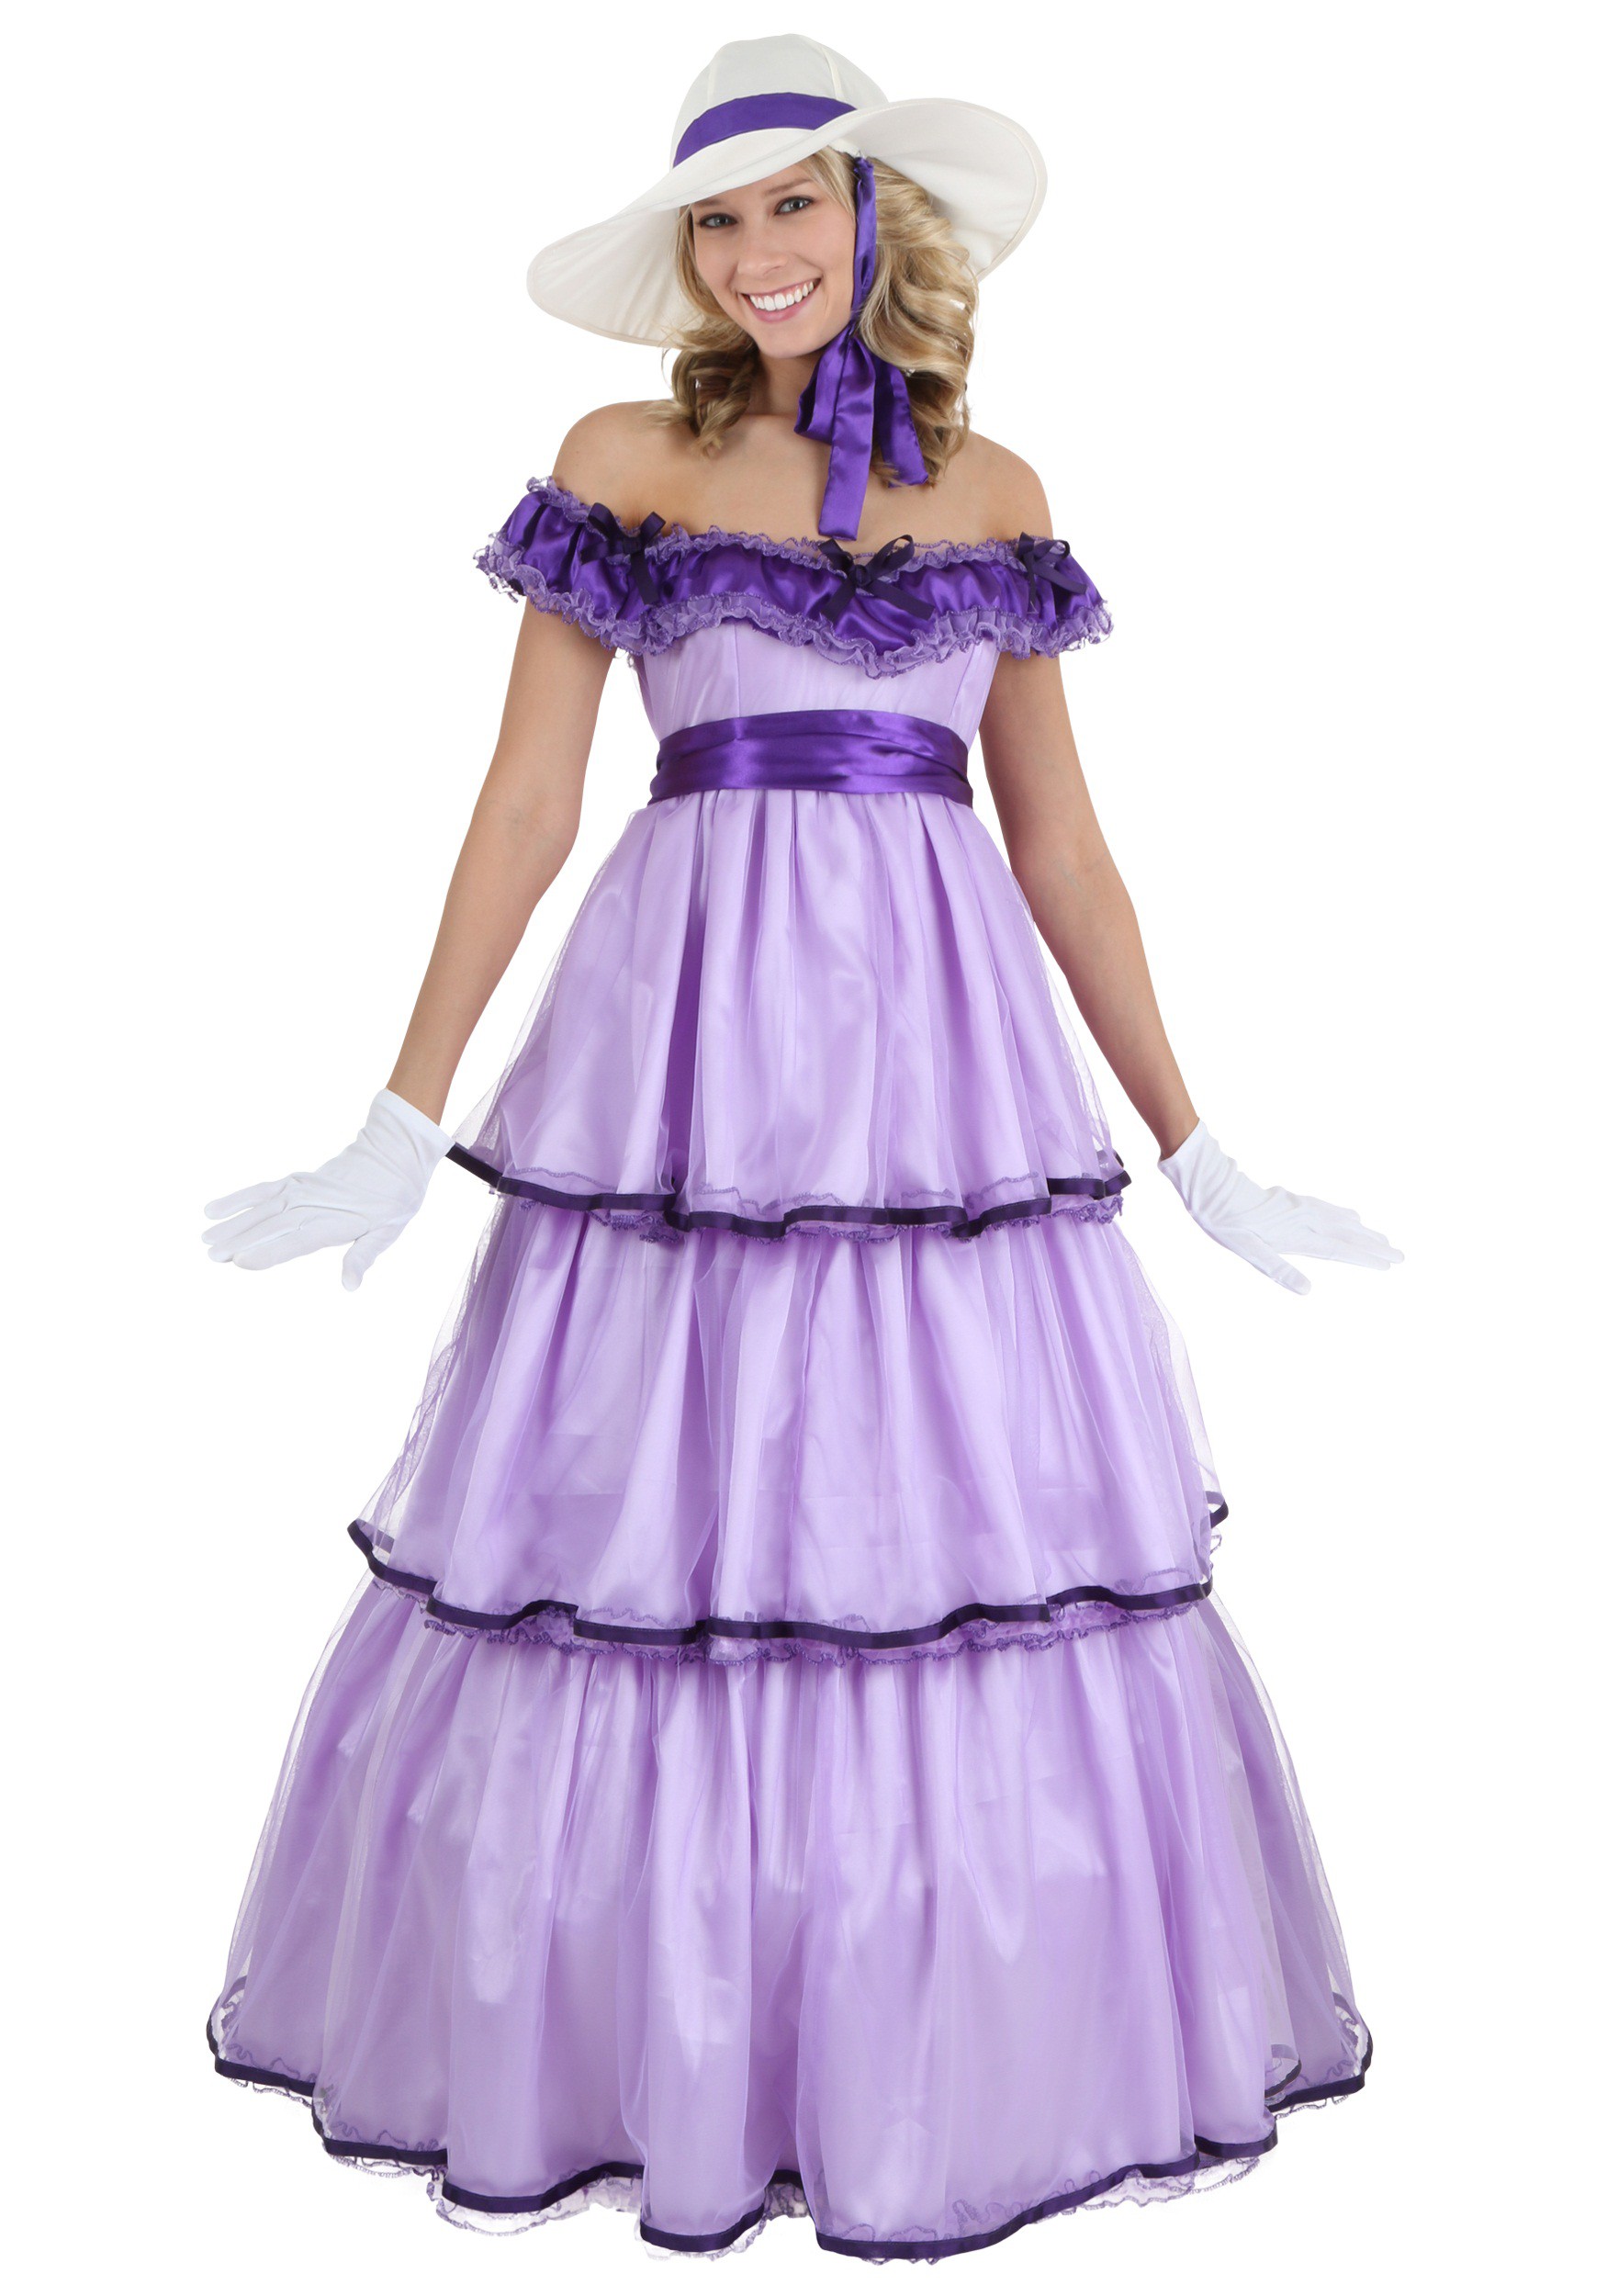 Deluxe Southern Belle Adult Fancy Dress Costume